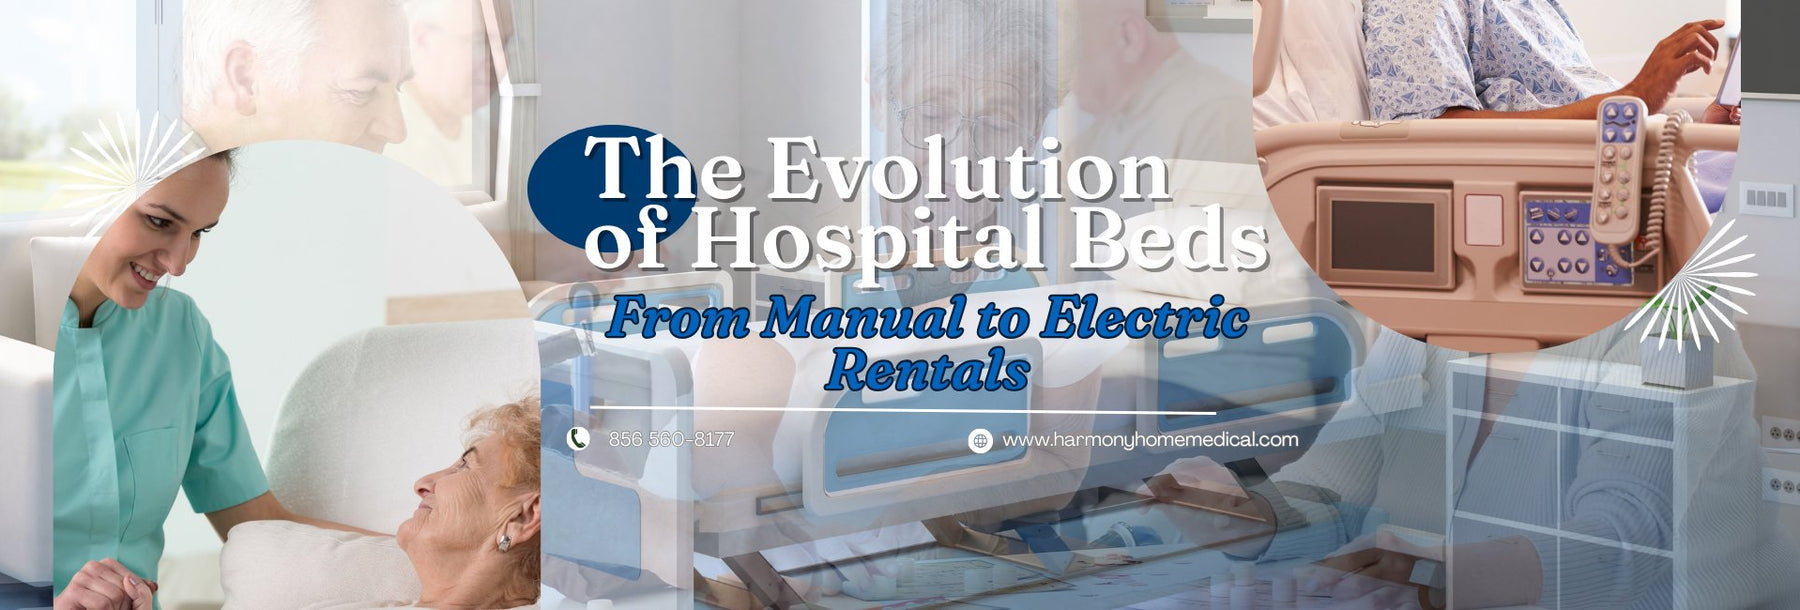 The Evolution of Hospital Beds: From Manual to Electric Rentals - Harmony Home Medical Supply